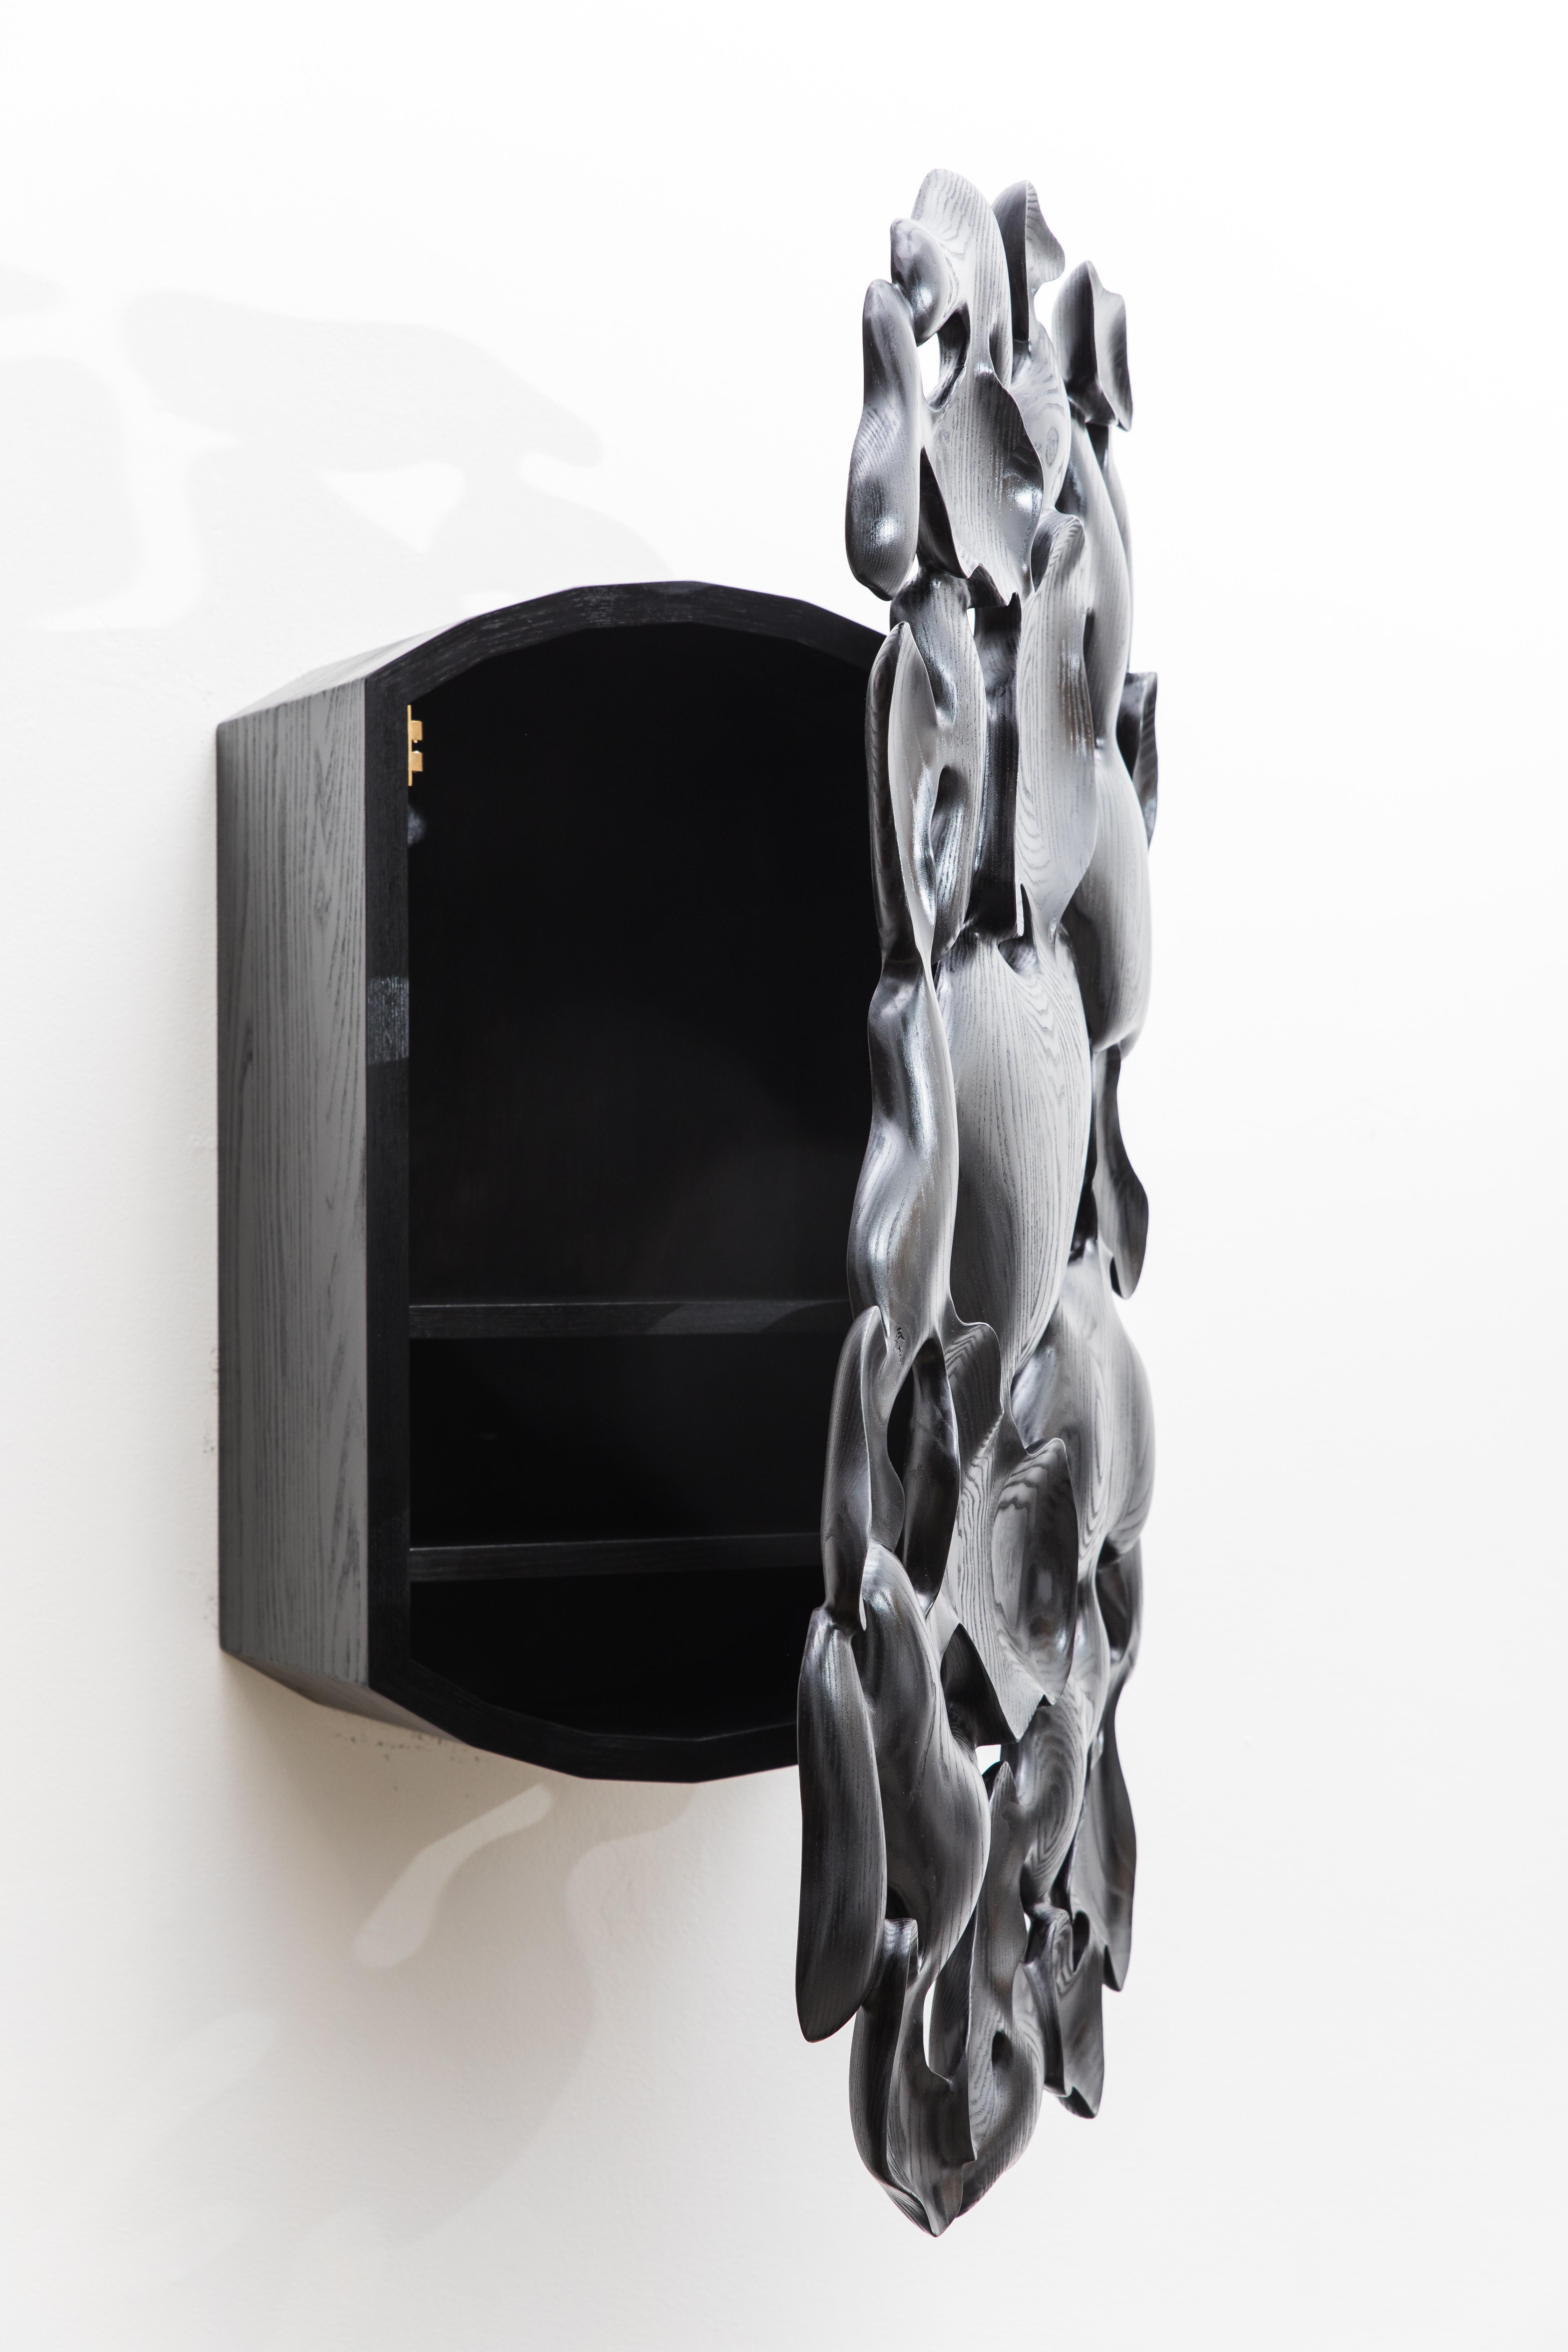 Ash Yunhwan Kim, Unintended Series Wall Cabinet, ROK For Sale